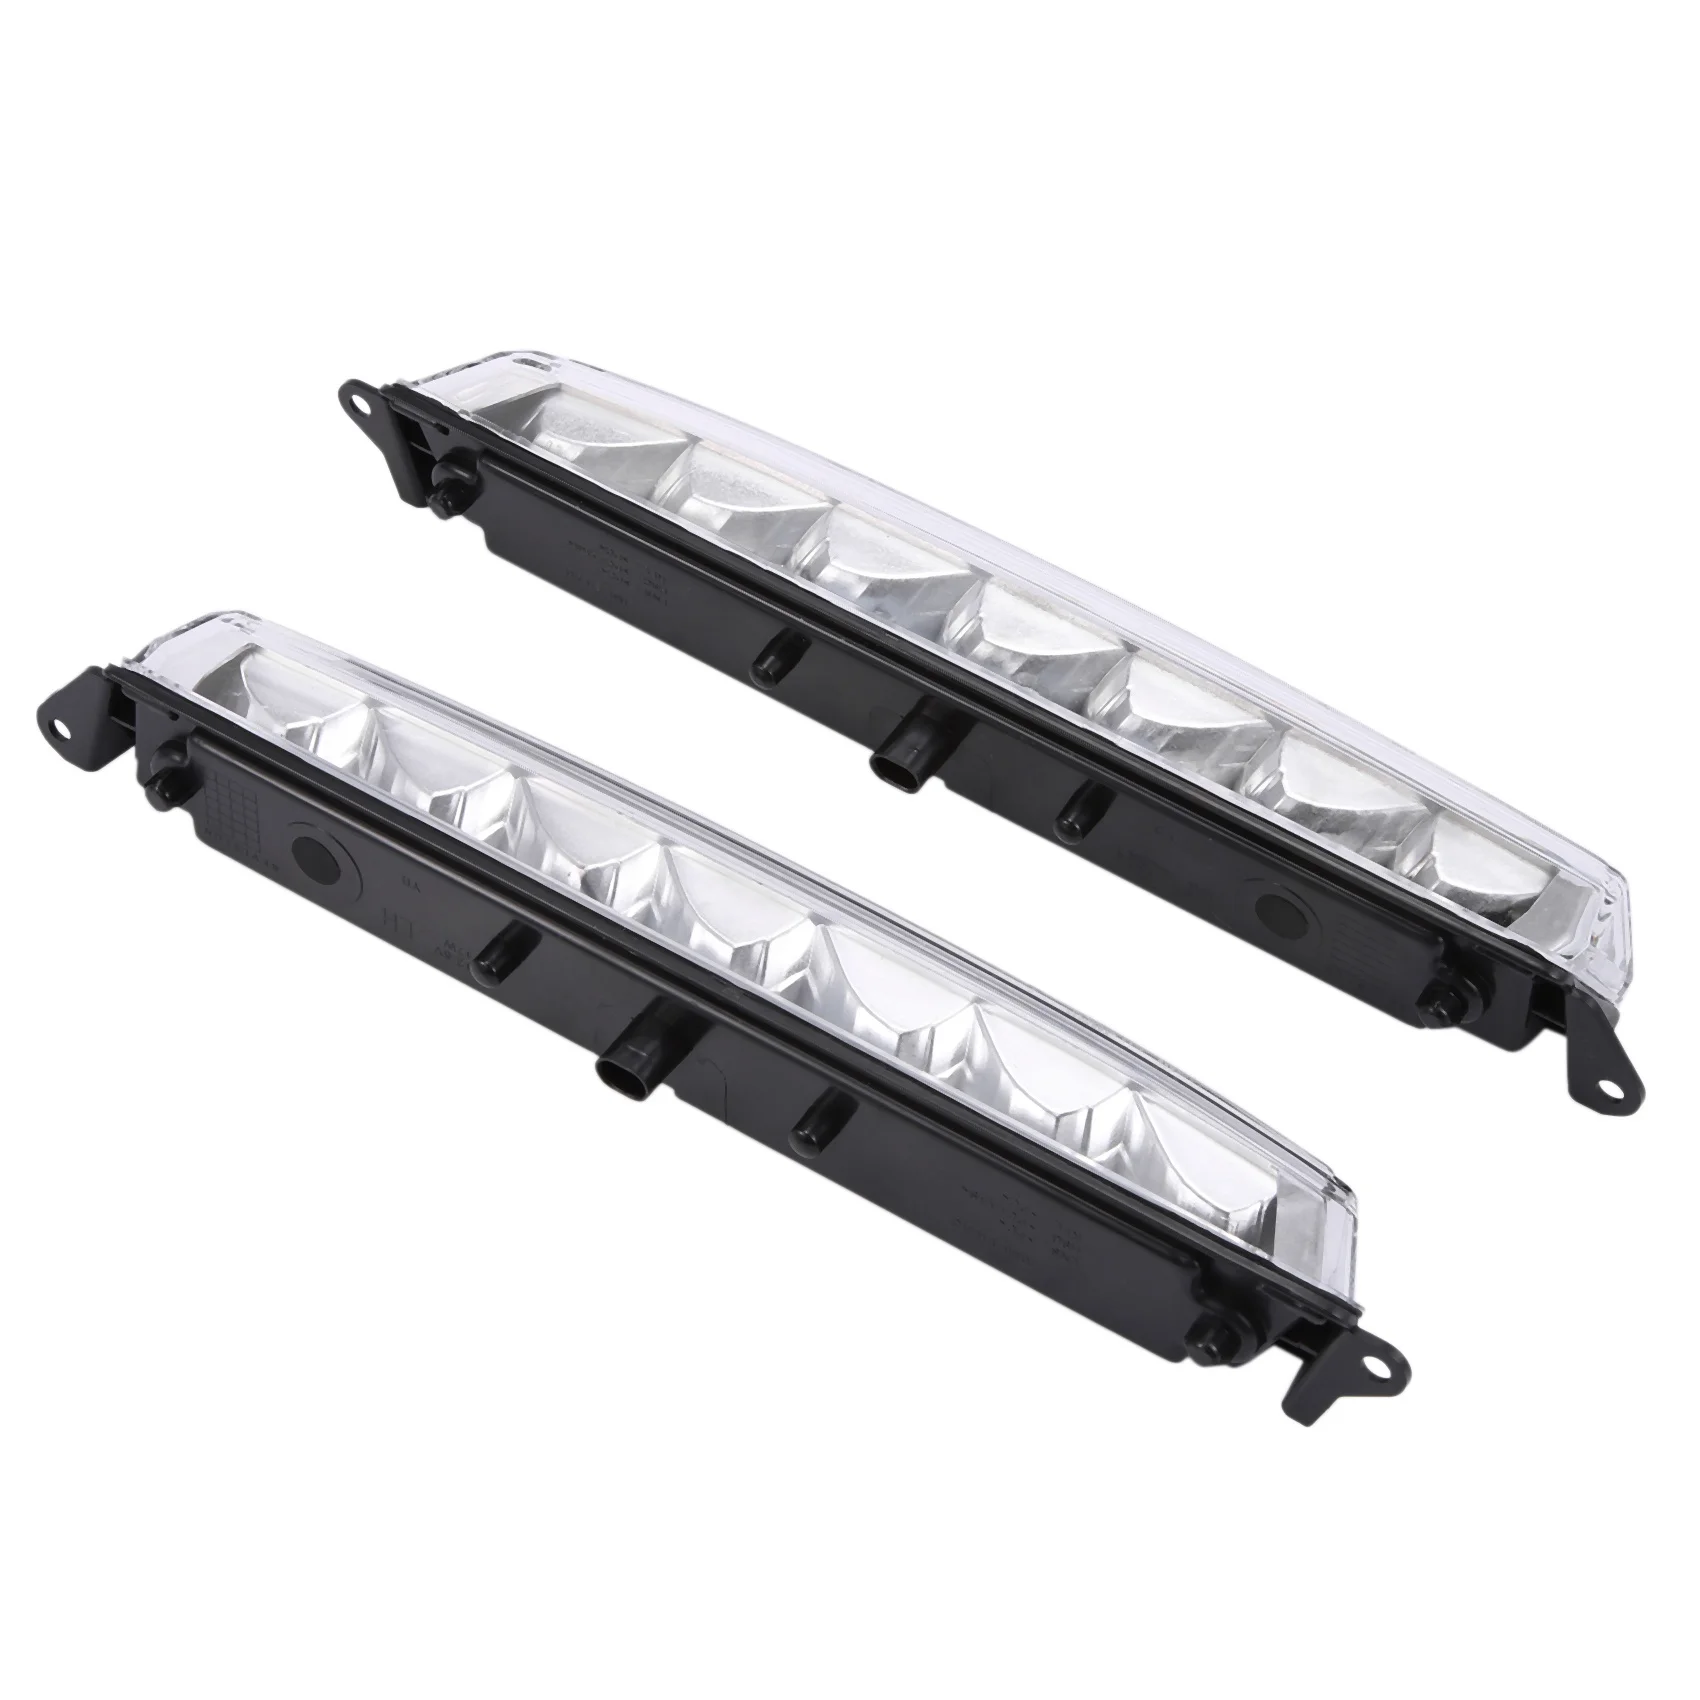 

1 Pair of Left and Right LED Daytime Running Fog Lights for Mercedes-Benz X164 X166 GL320 GL350 ML63 AMG 1649060351 1649060451